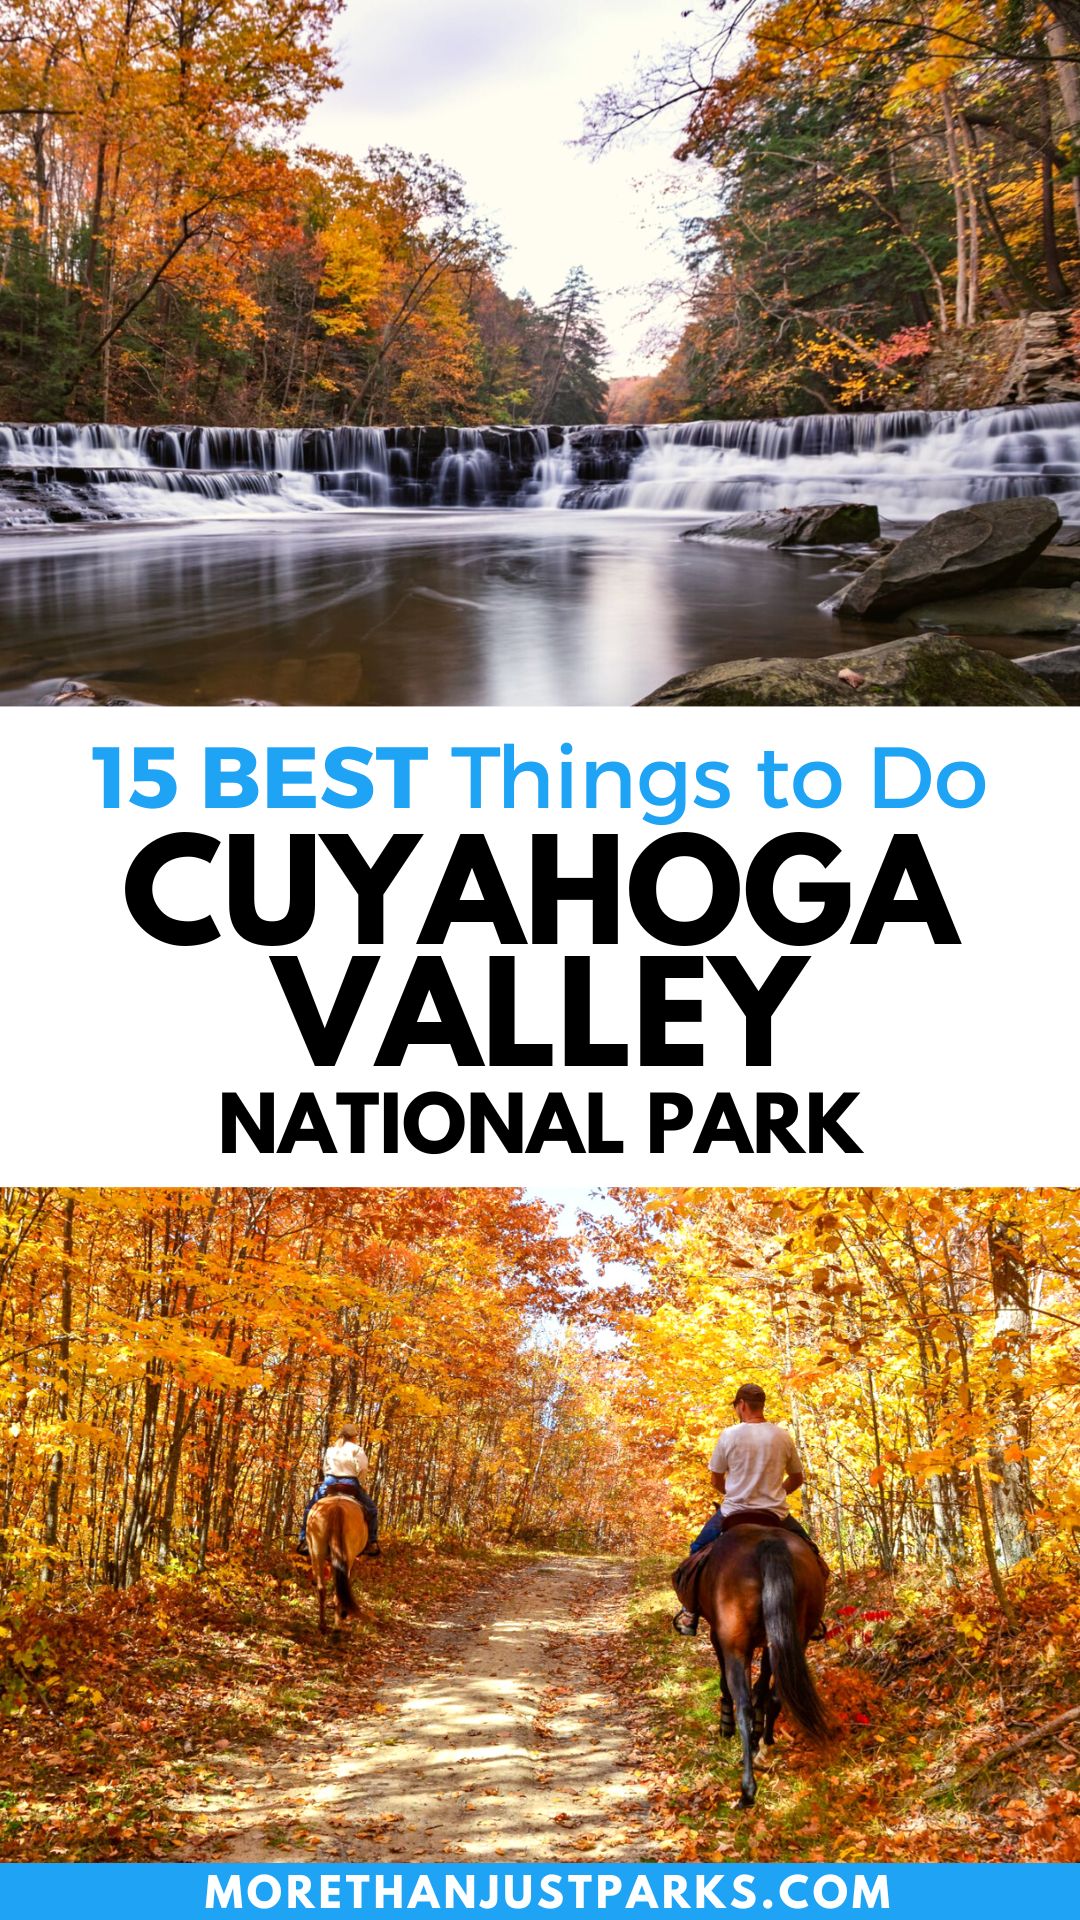 things to do cuyahoga valley national park, things to do cuyahoga valley